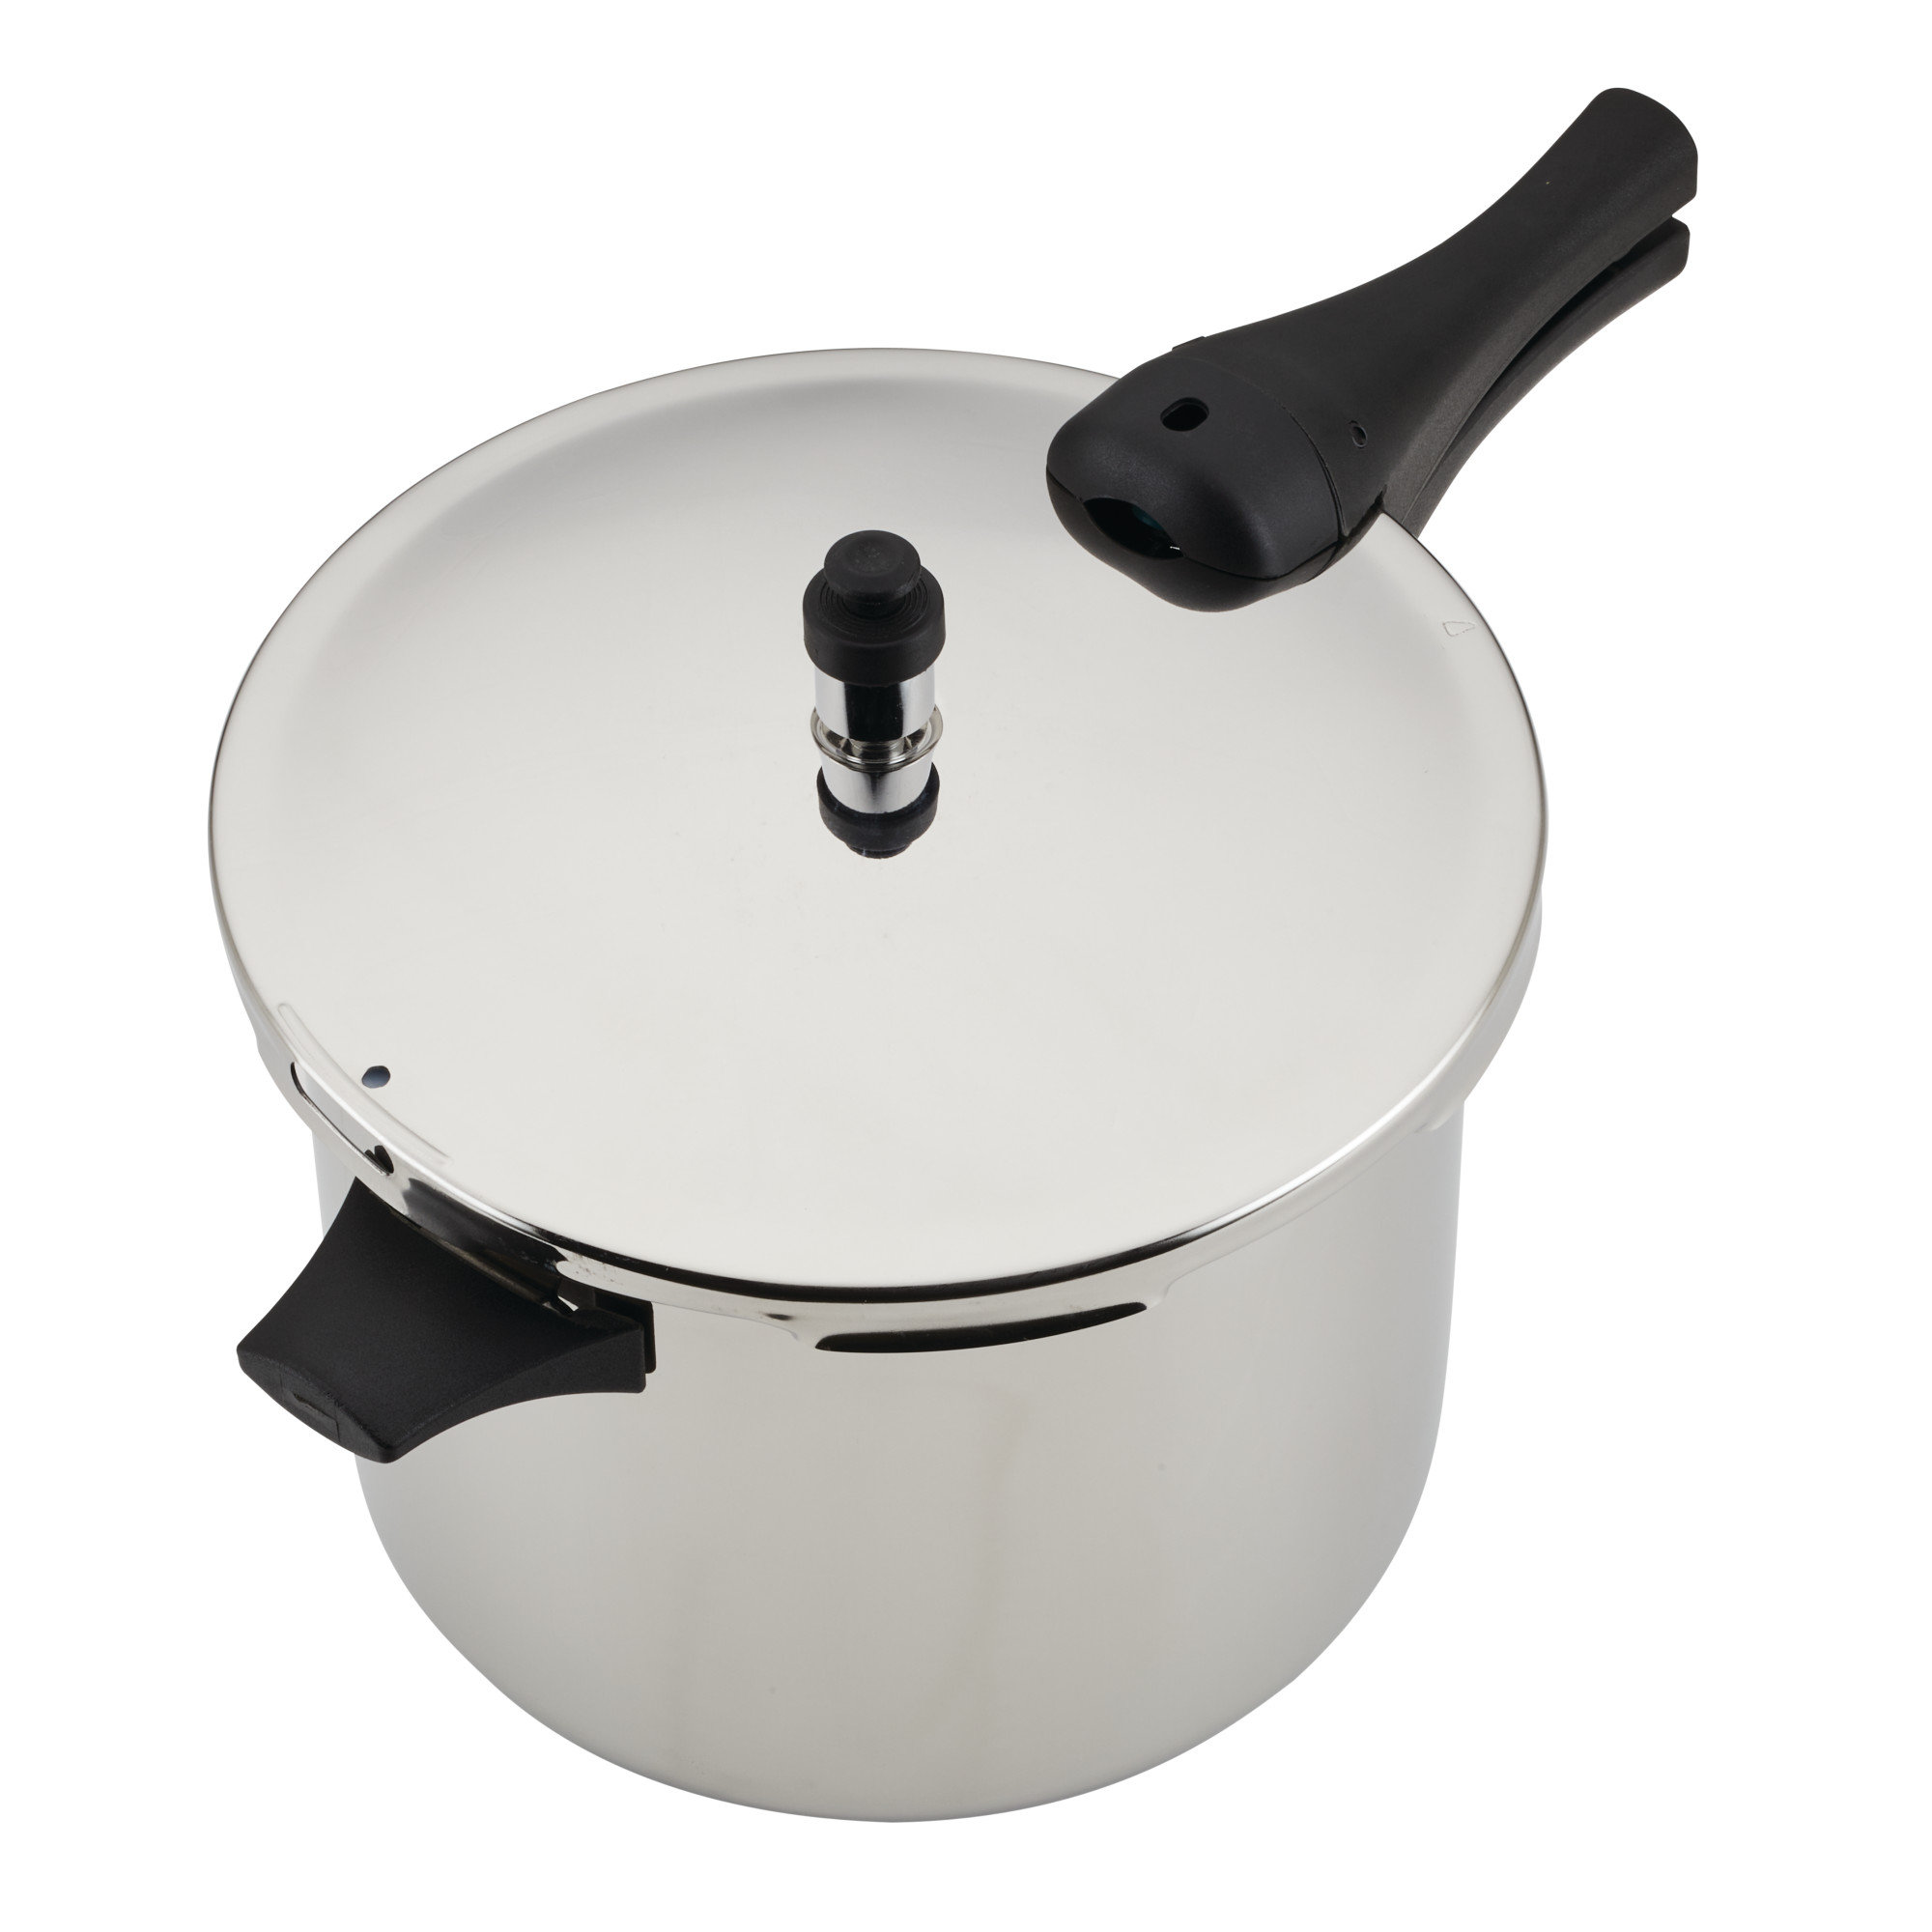 Parts and Accessories For 8-Quart Stainless Steel Pressure Cooker - Presto®